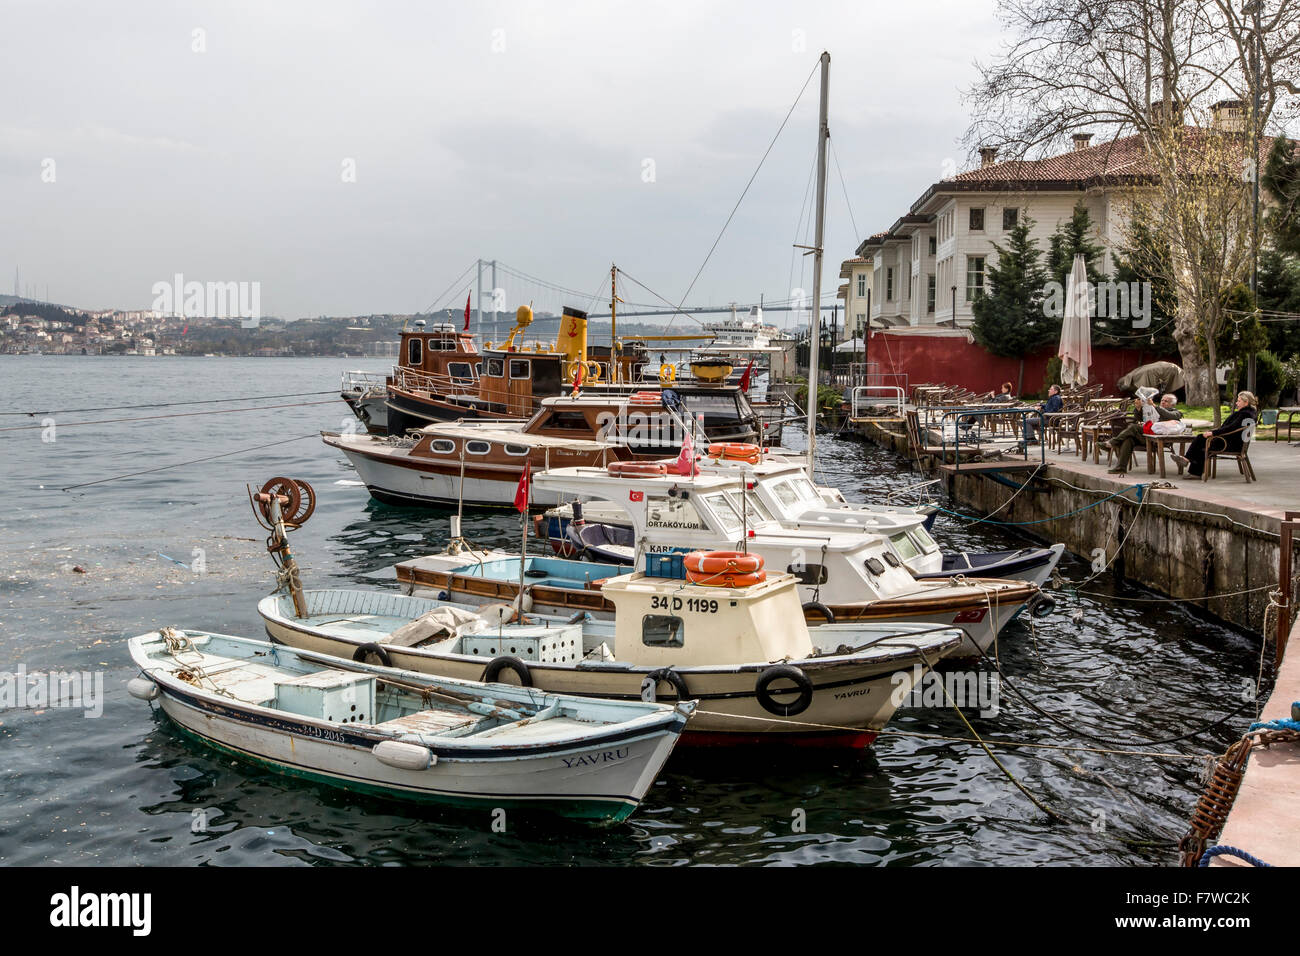 Moored Boat at Harbour, Ortaköy, Istanbul, Turkey Stock Photo